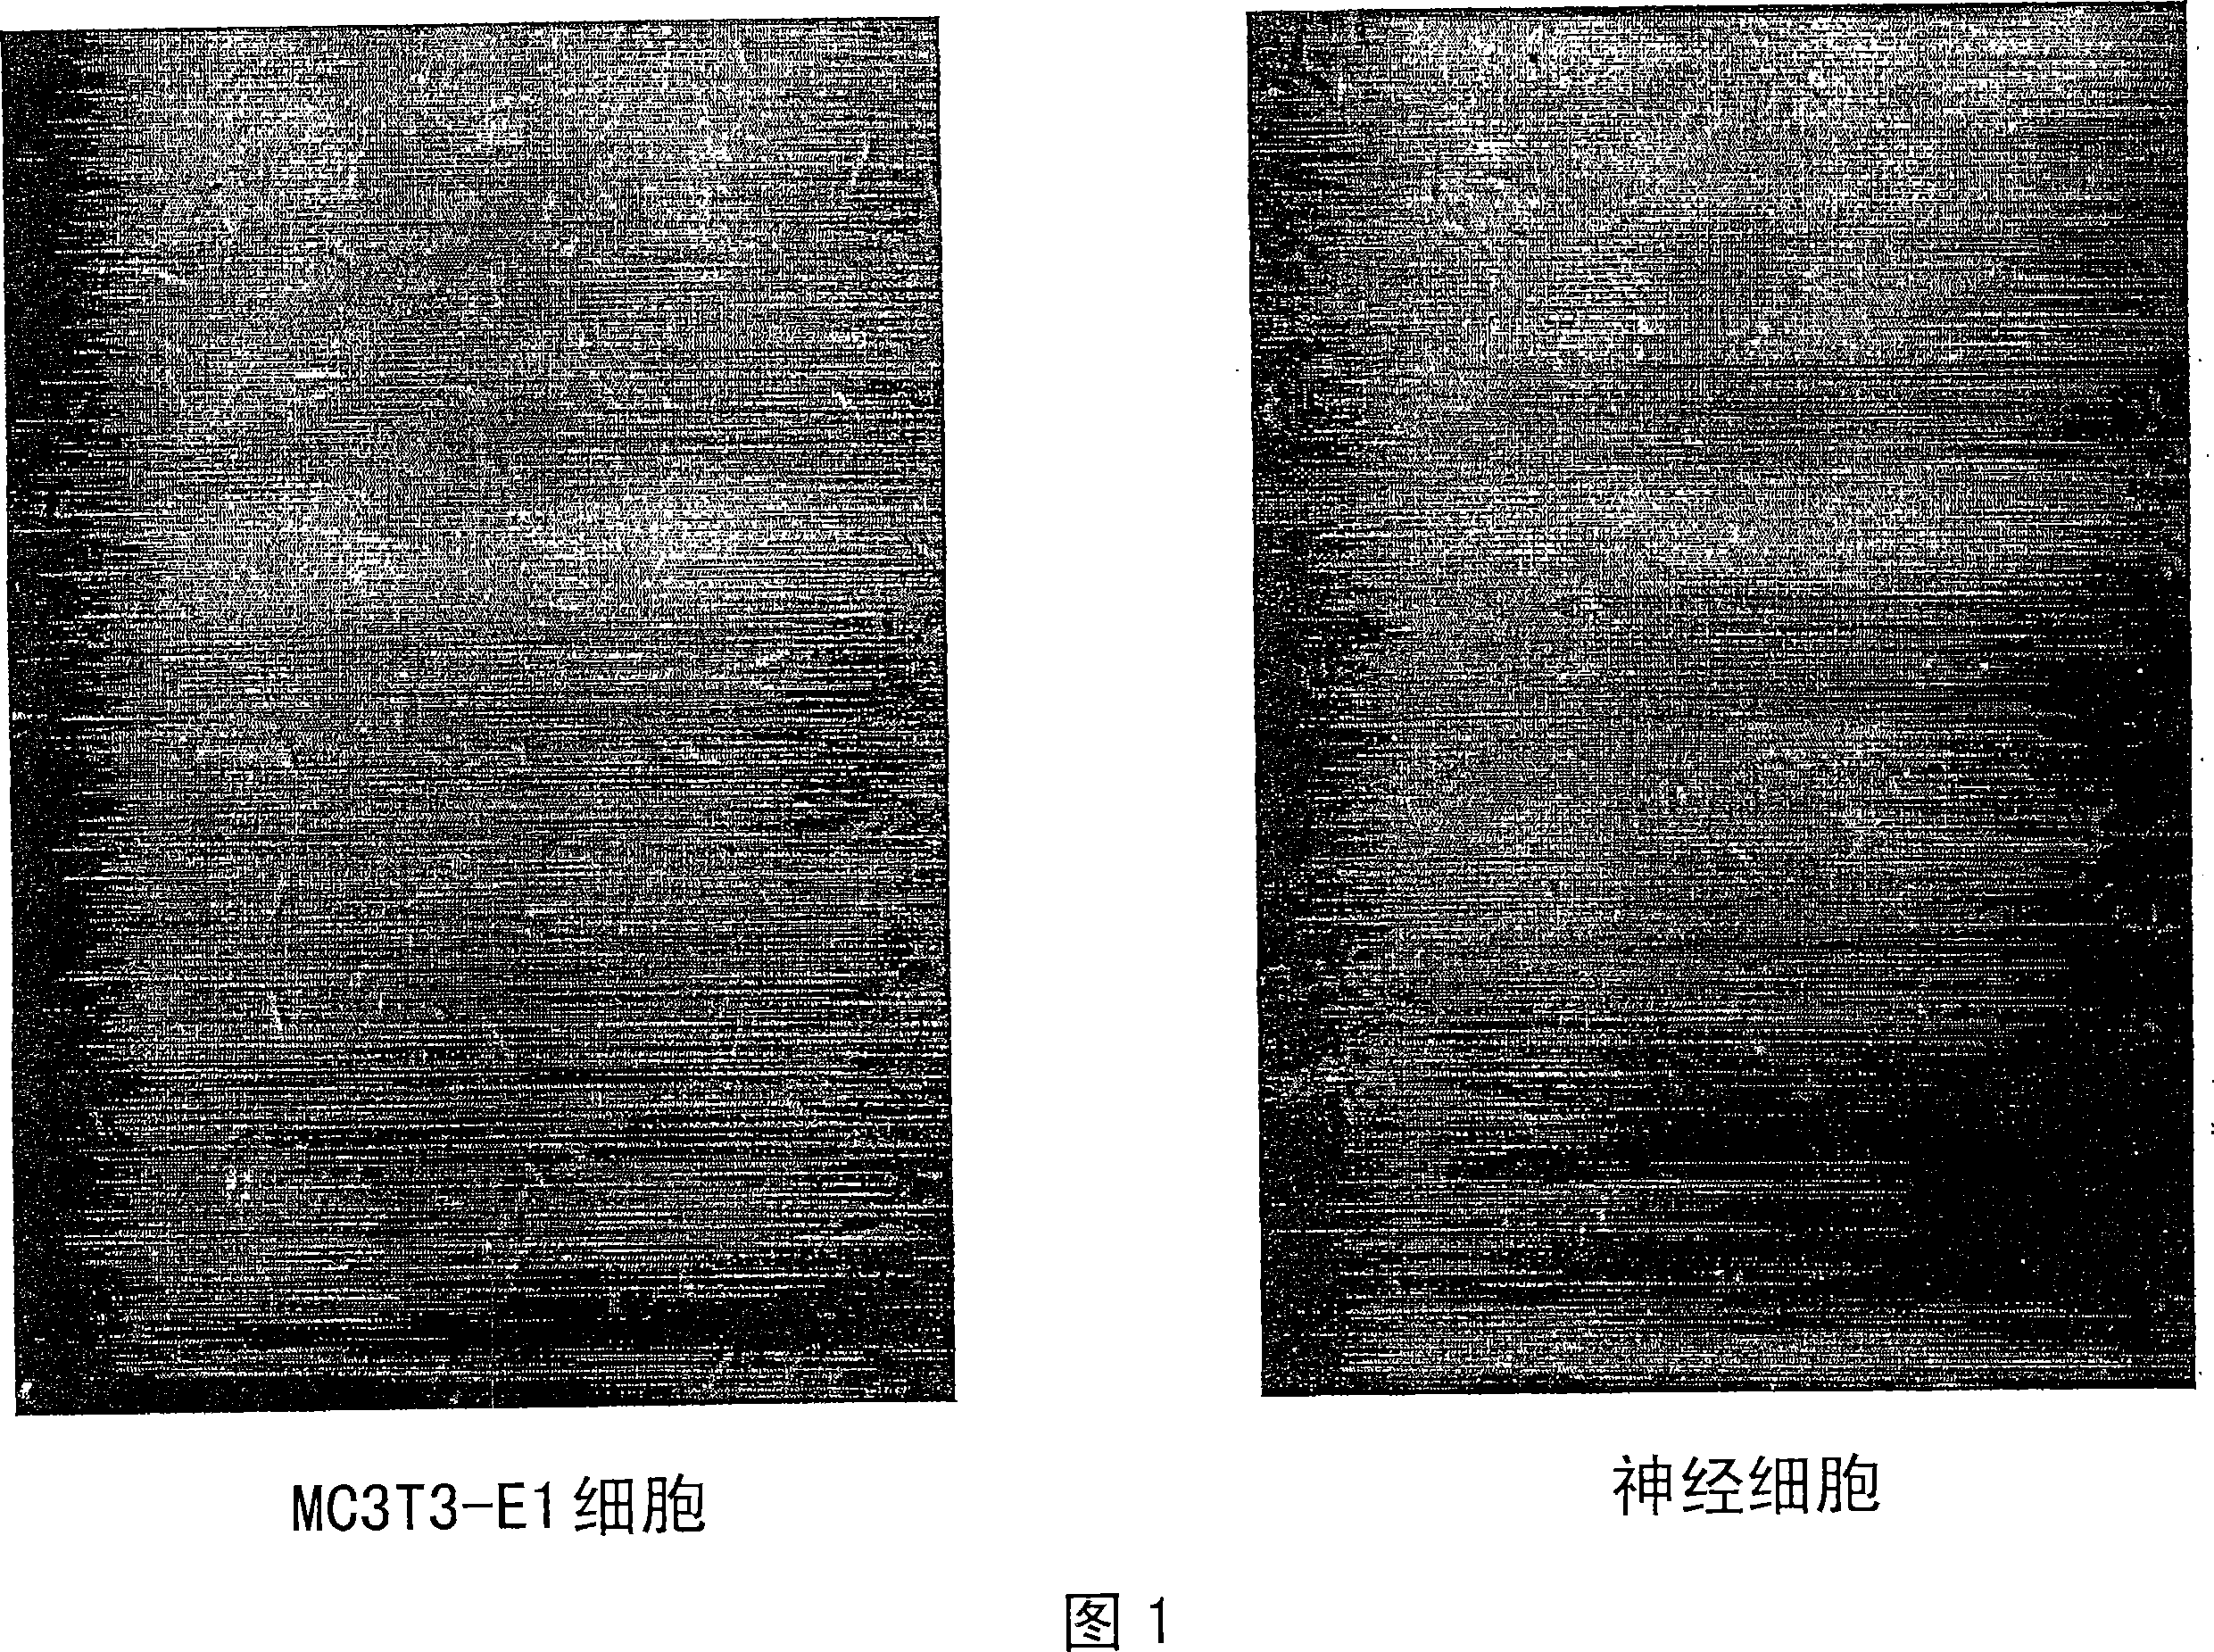 Method of cell transdifferentiation